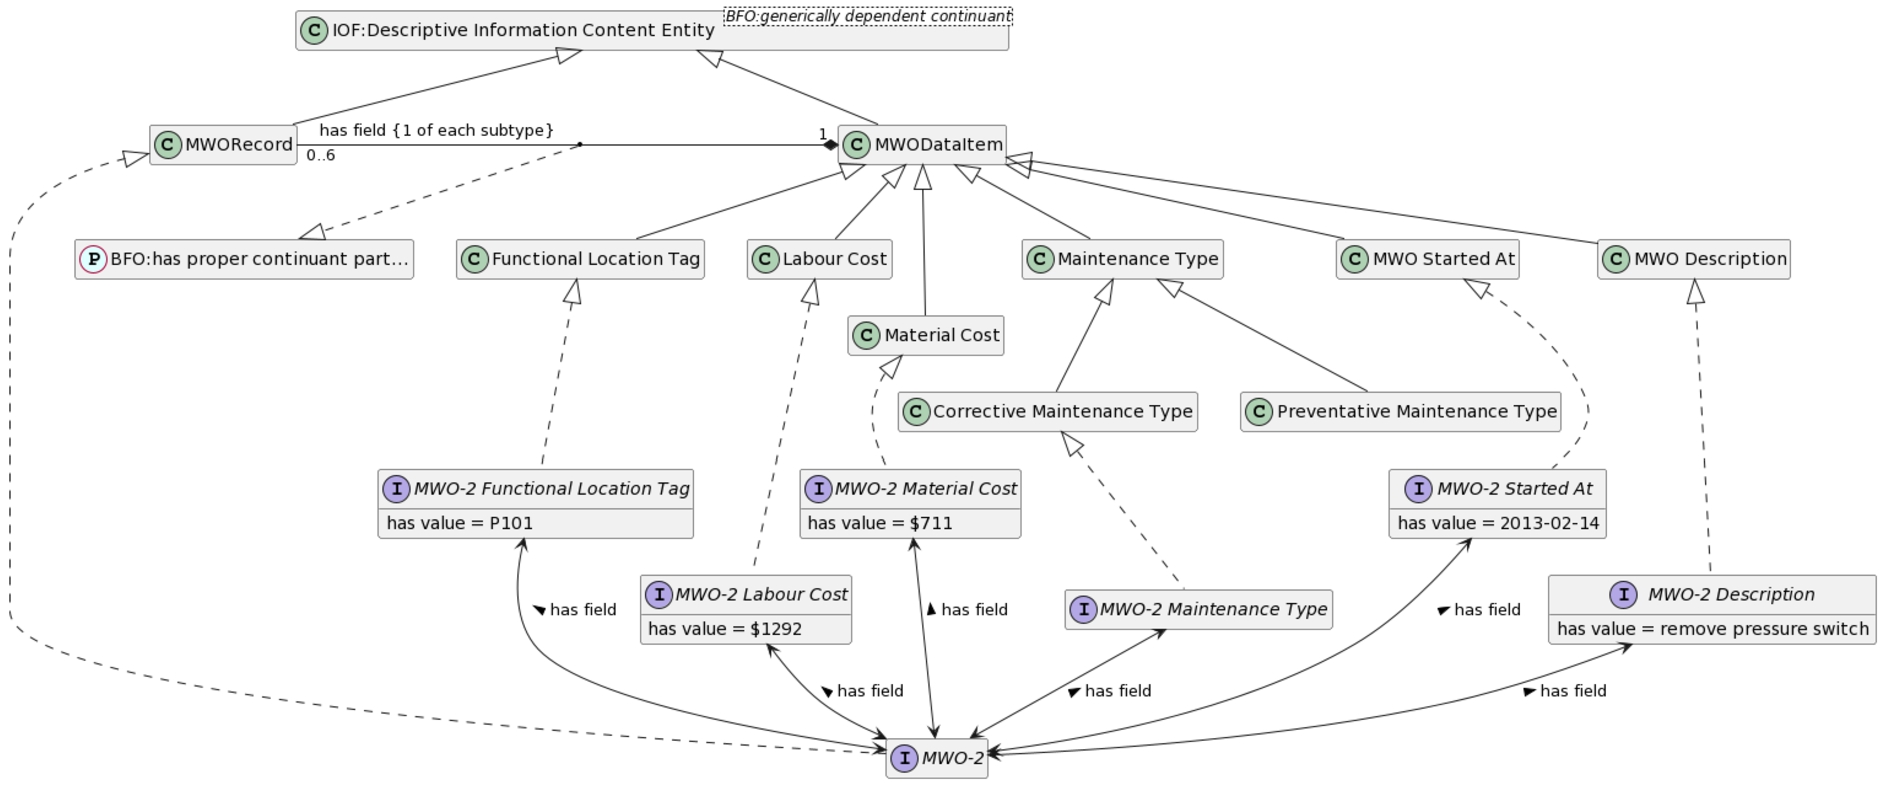 A conceptual diagram of information content entities for work order records in the application-level ontology.